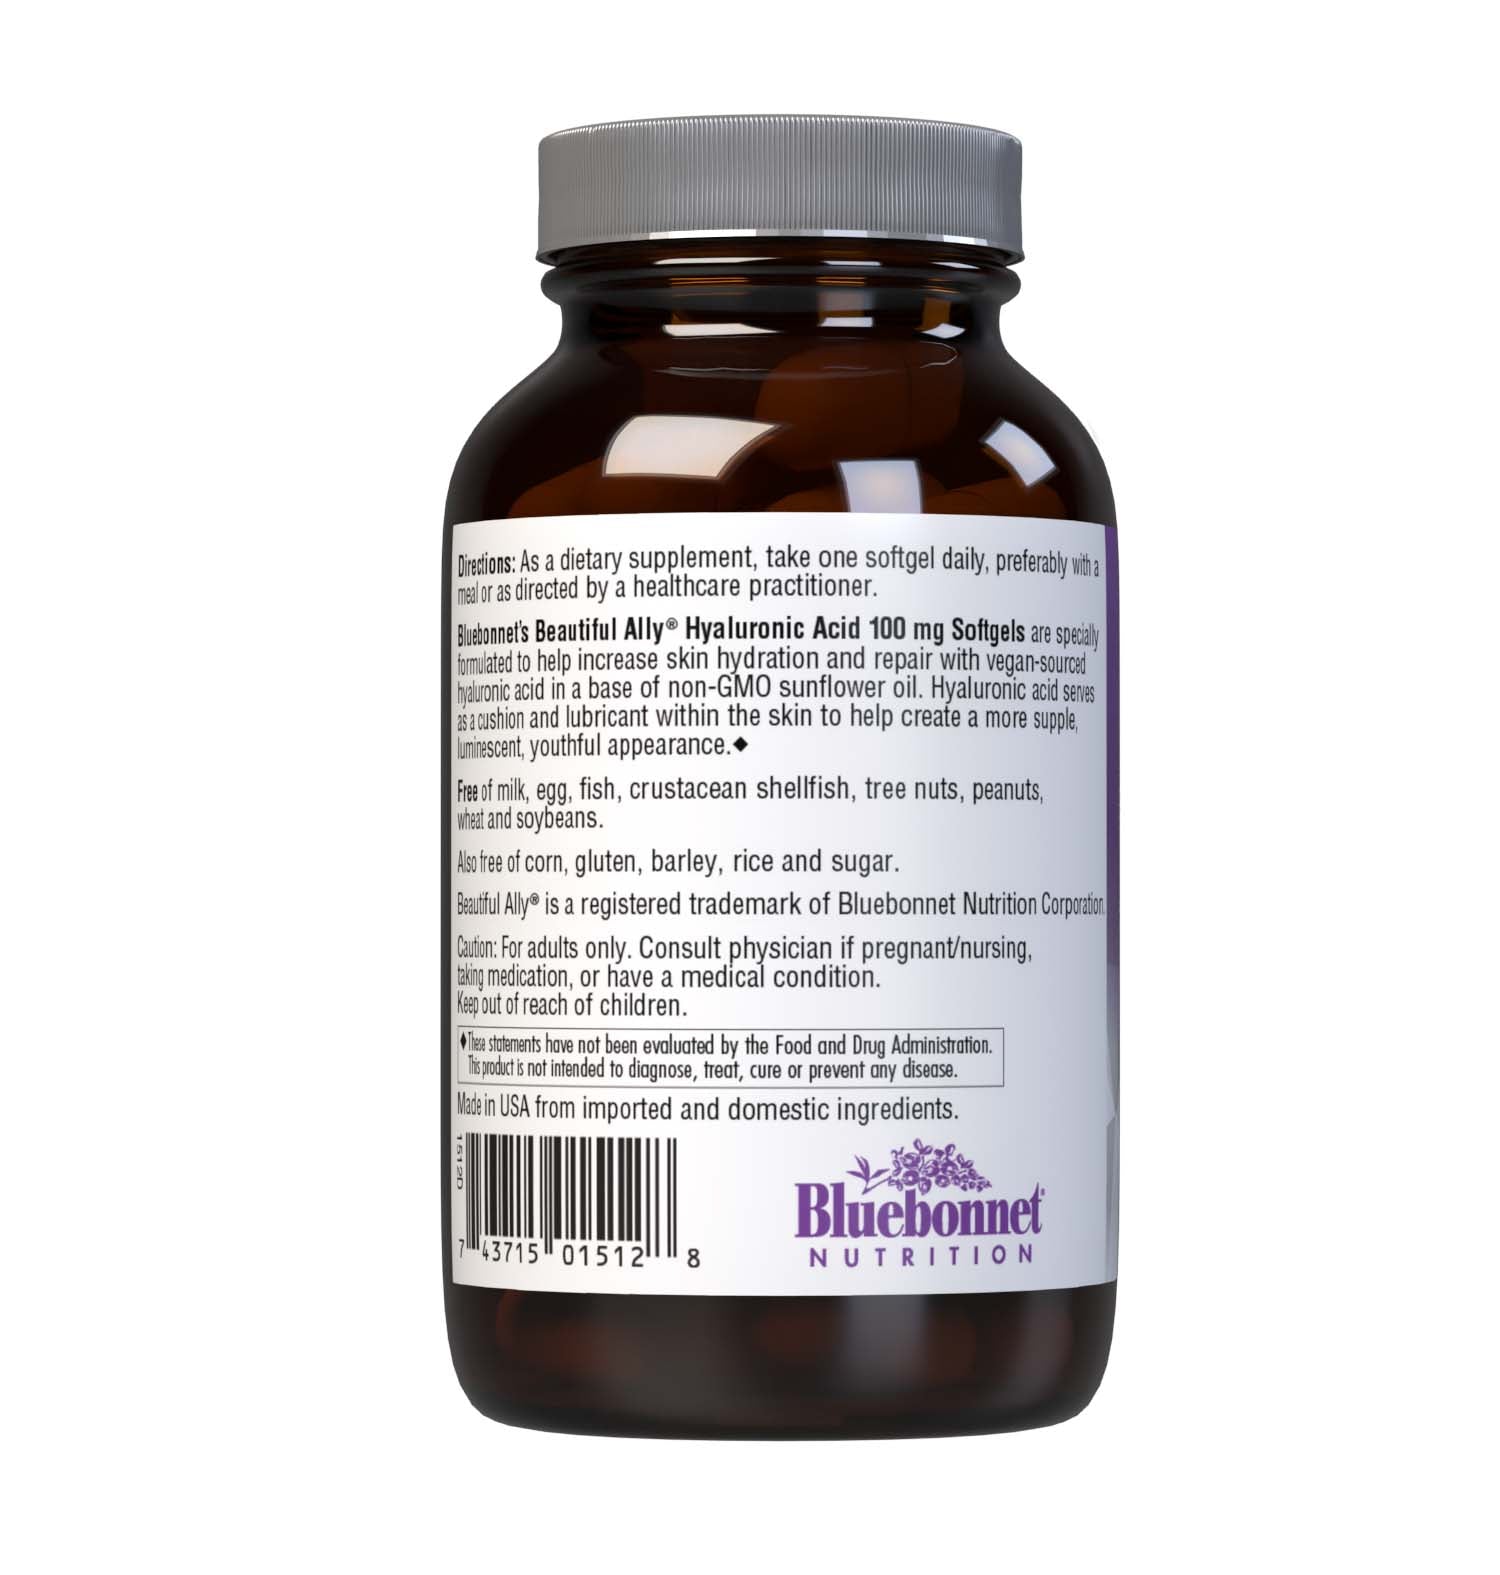 Bluebonnet’s Beautiful Ally Hyaluronic Acid 100 mg 90 Softgels are specially formulated to help increase skin hydration and repair with vegan-sourced hyaluronic acid in a base of non-GMO sunflower oil. Hyaluronic acid serves as a cushion and lubricant with the skin tp help create a more supple, luminescent, youthful appearance. Description panel. #size_90 count